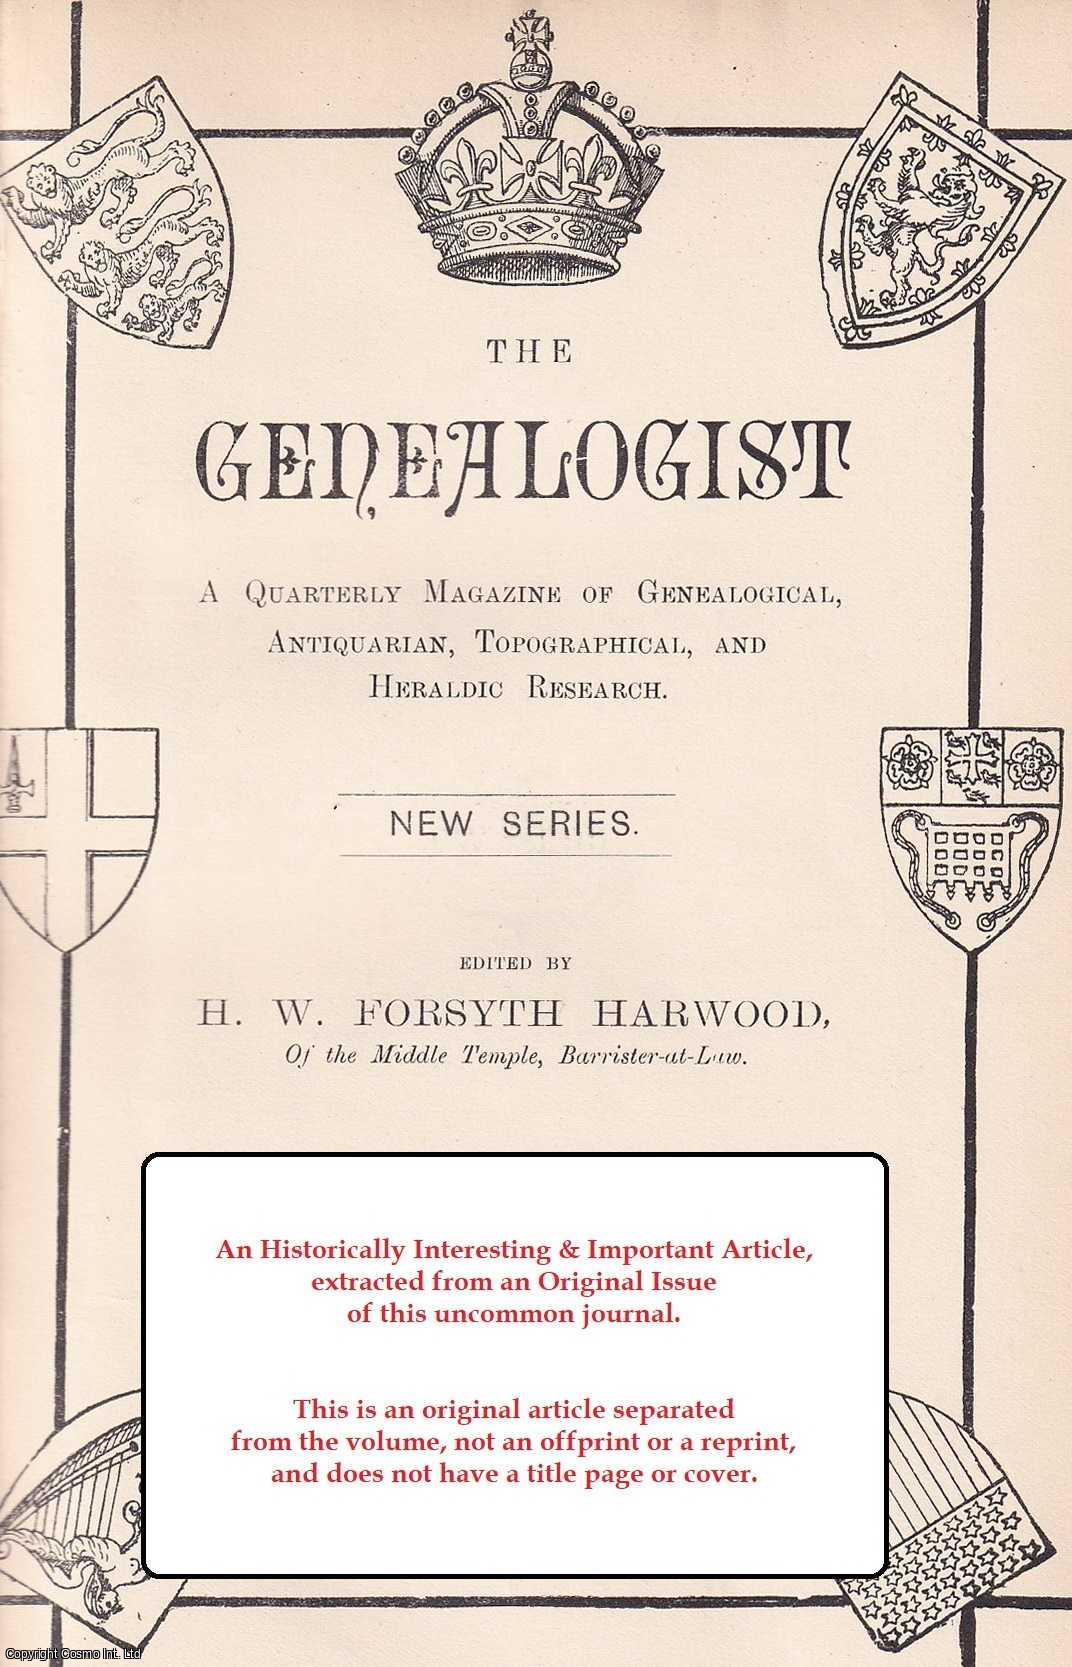 G. W. M. - Memoranda Relating to The Heralds' College. An original article from The Genealogist, 1896.